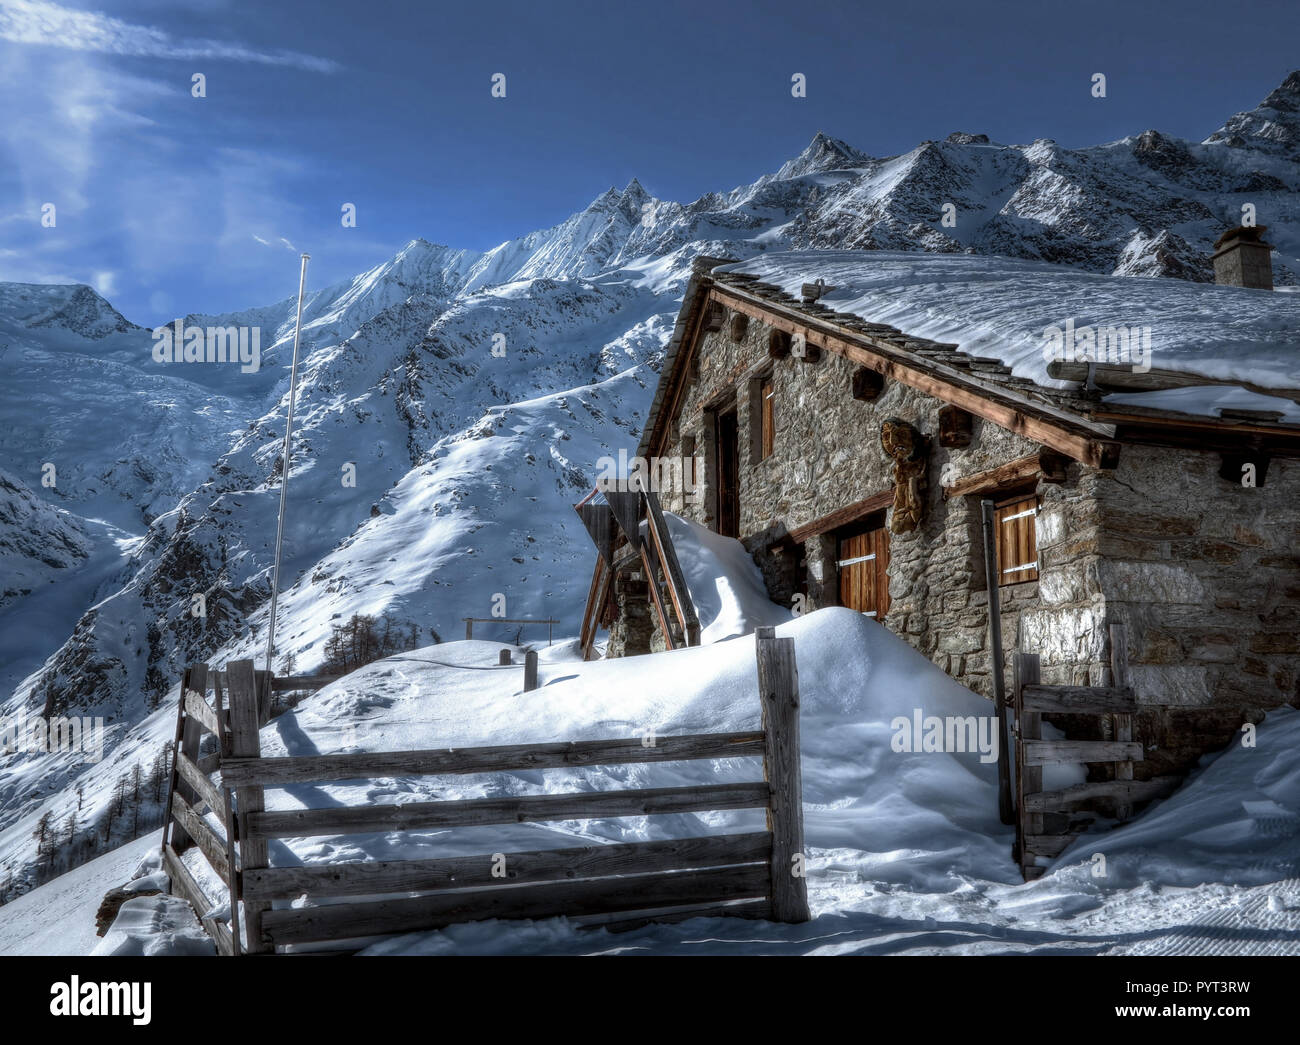 Snow covered mountain hut in the Swiss Alps, Saas-Fee, Switzerland Stock Photo